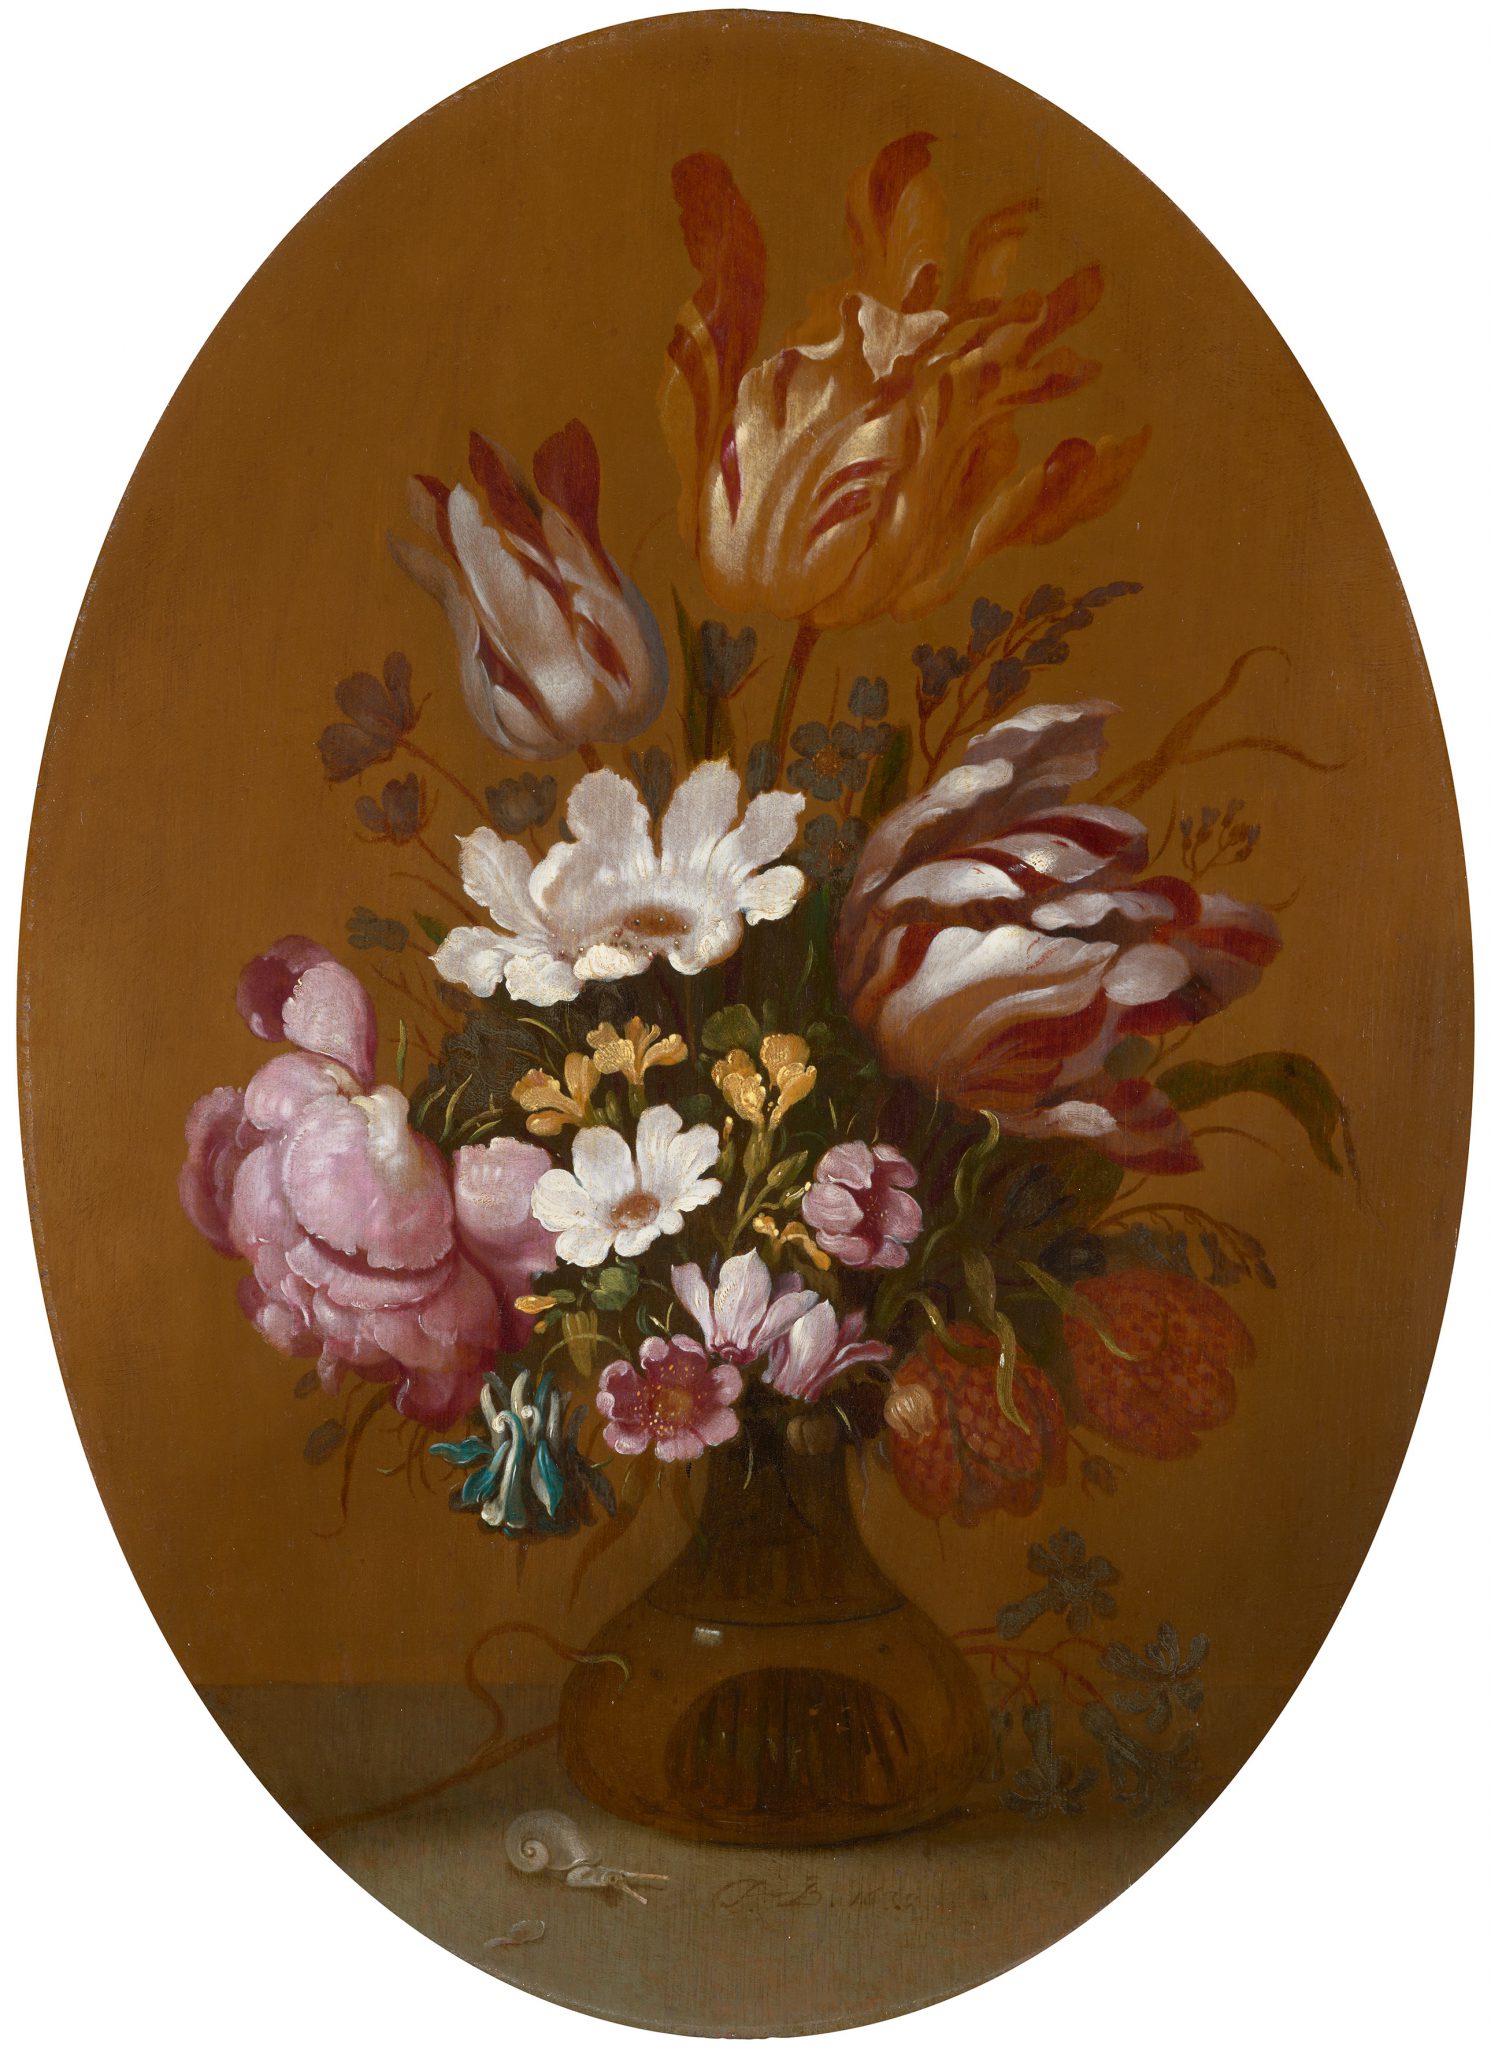 A still life of parrat tulips, roses and other flowers in a Glass Vase